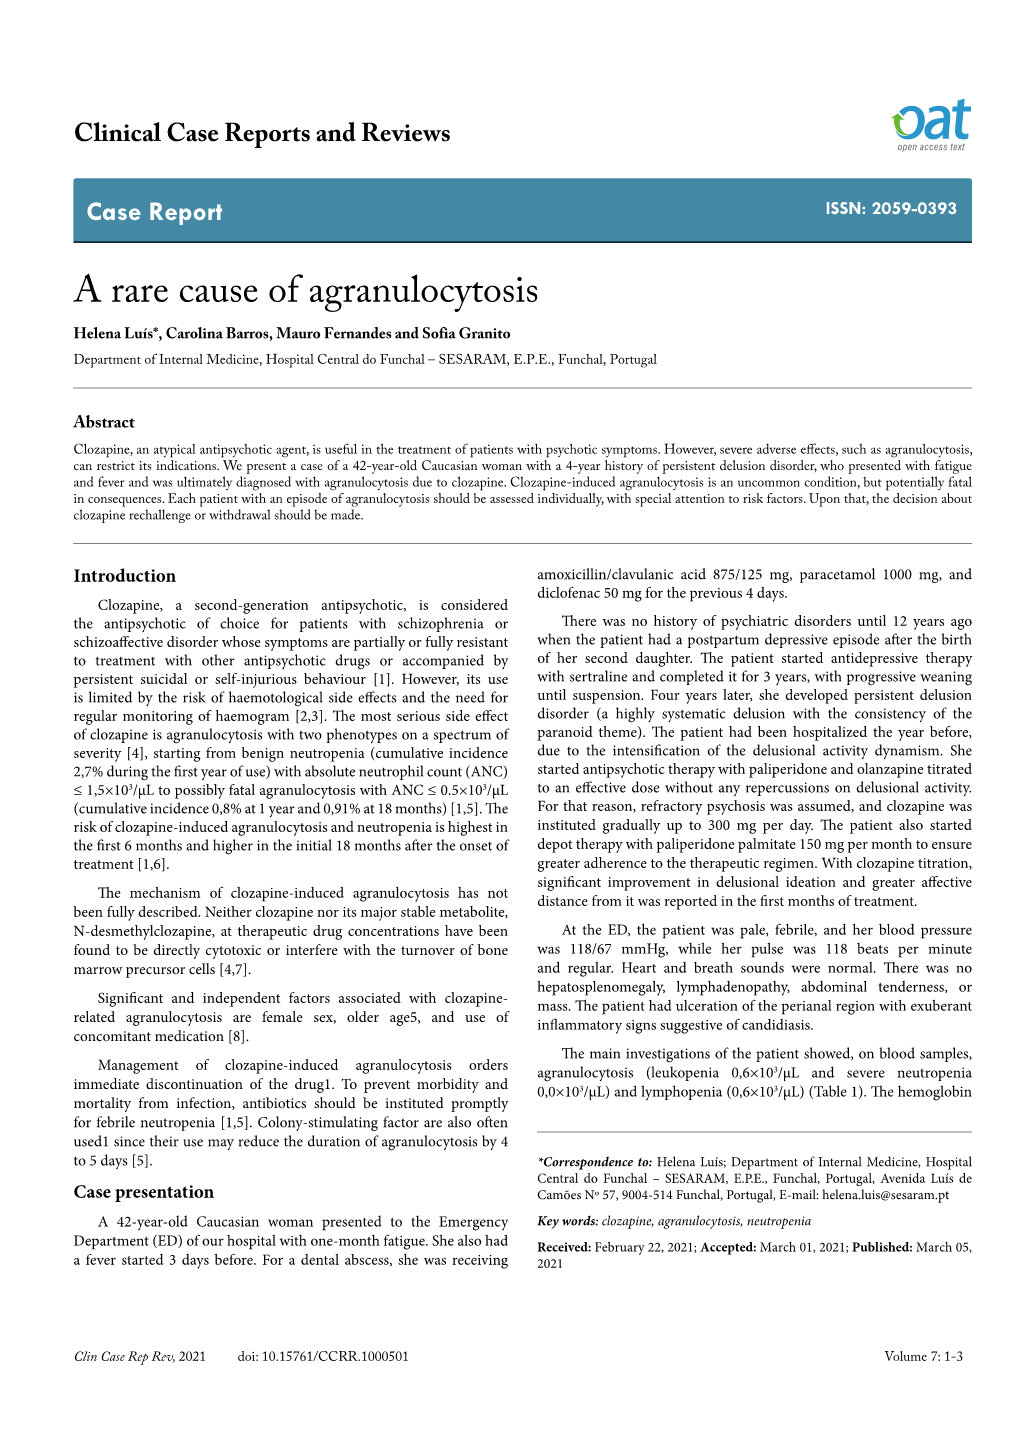 A Rare Cause of Agranulocytosis